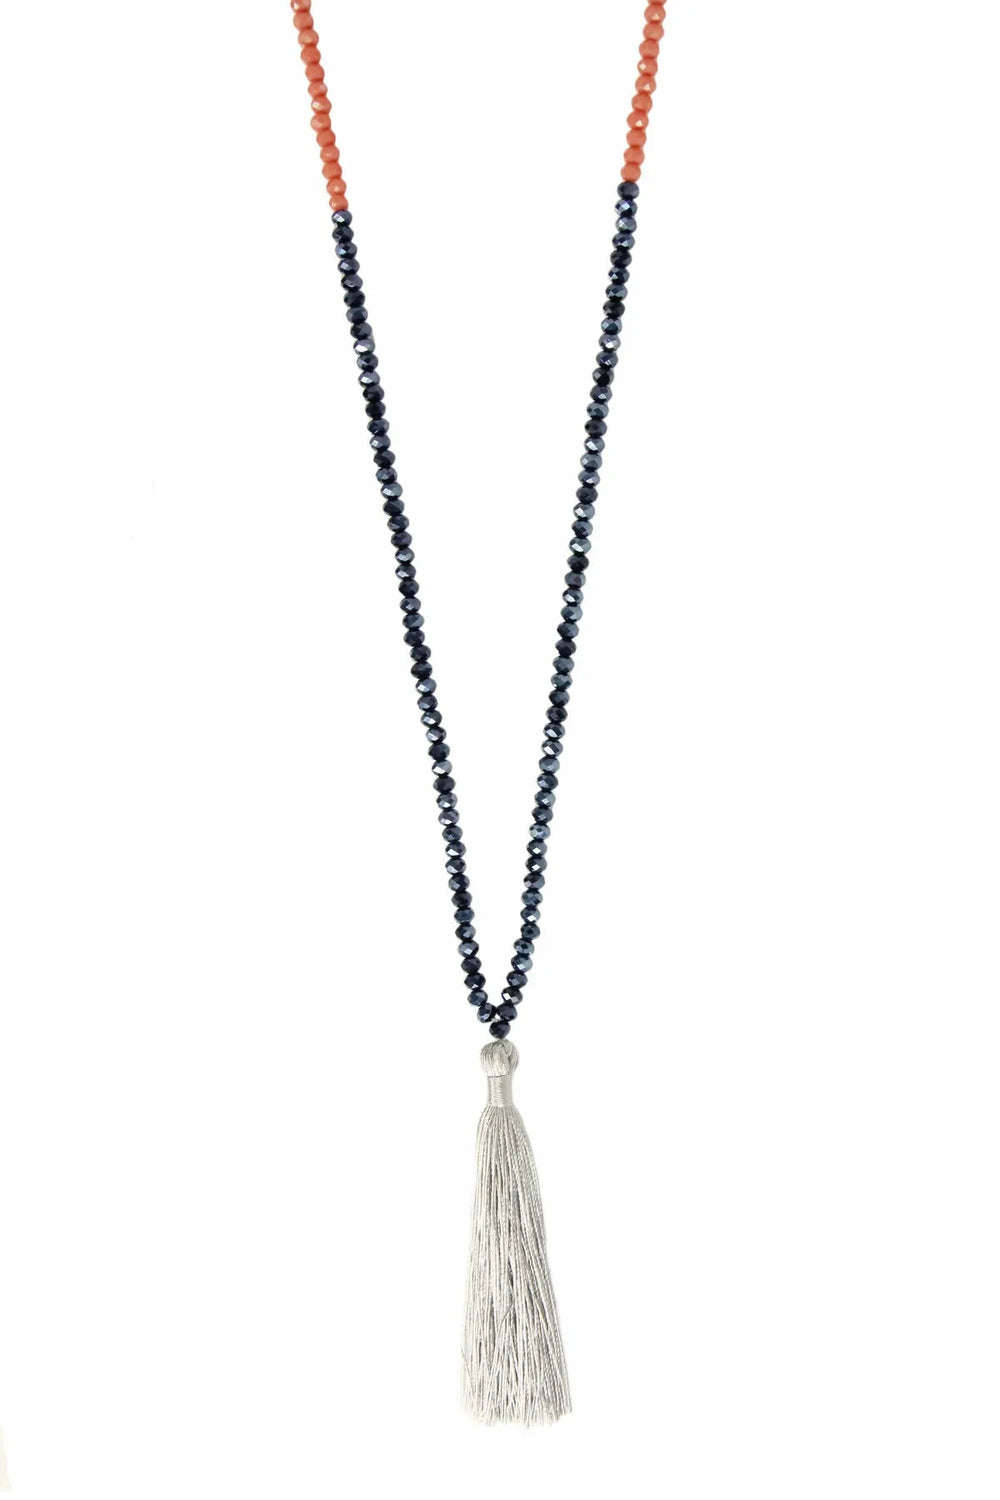 Long beaded tassel necklace Champagne with Hematite Light Salmon